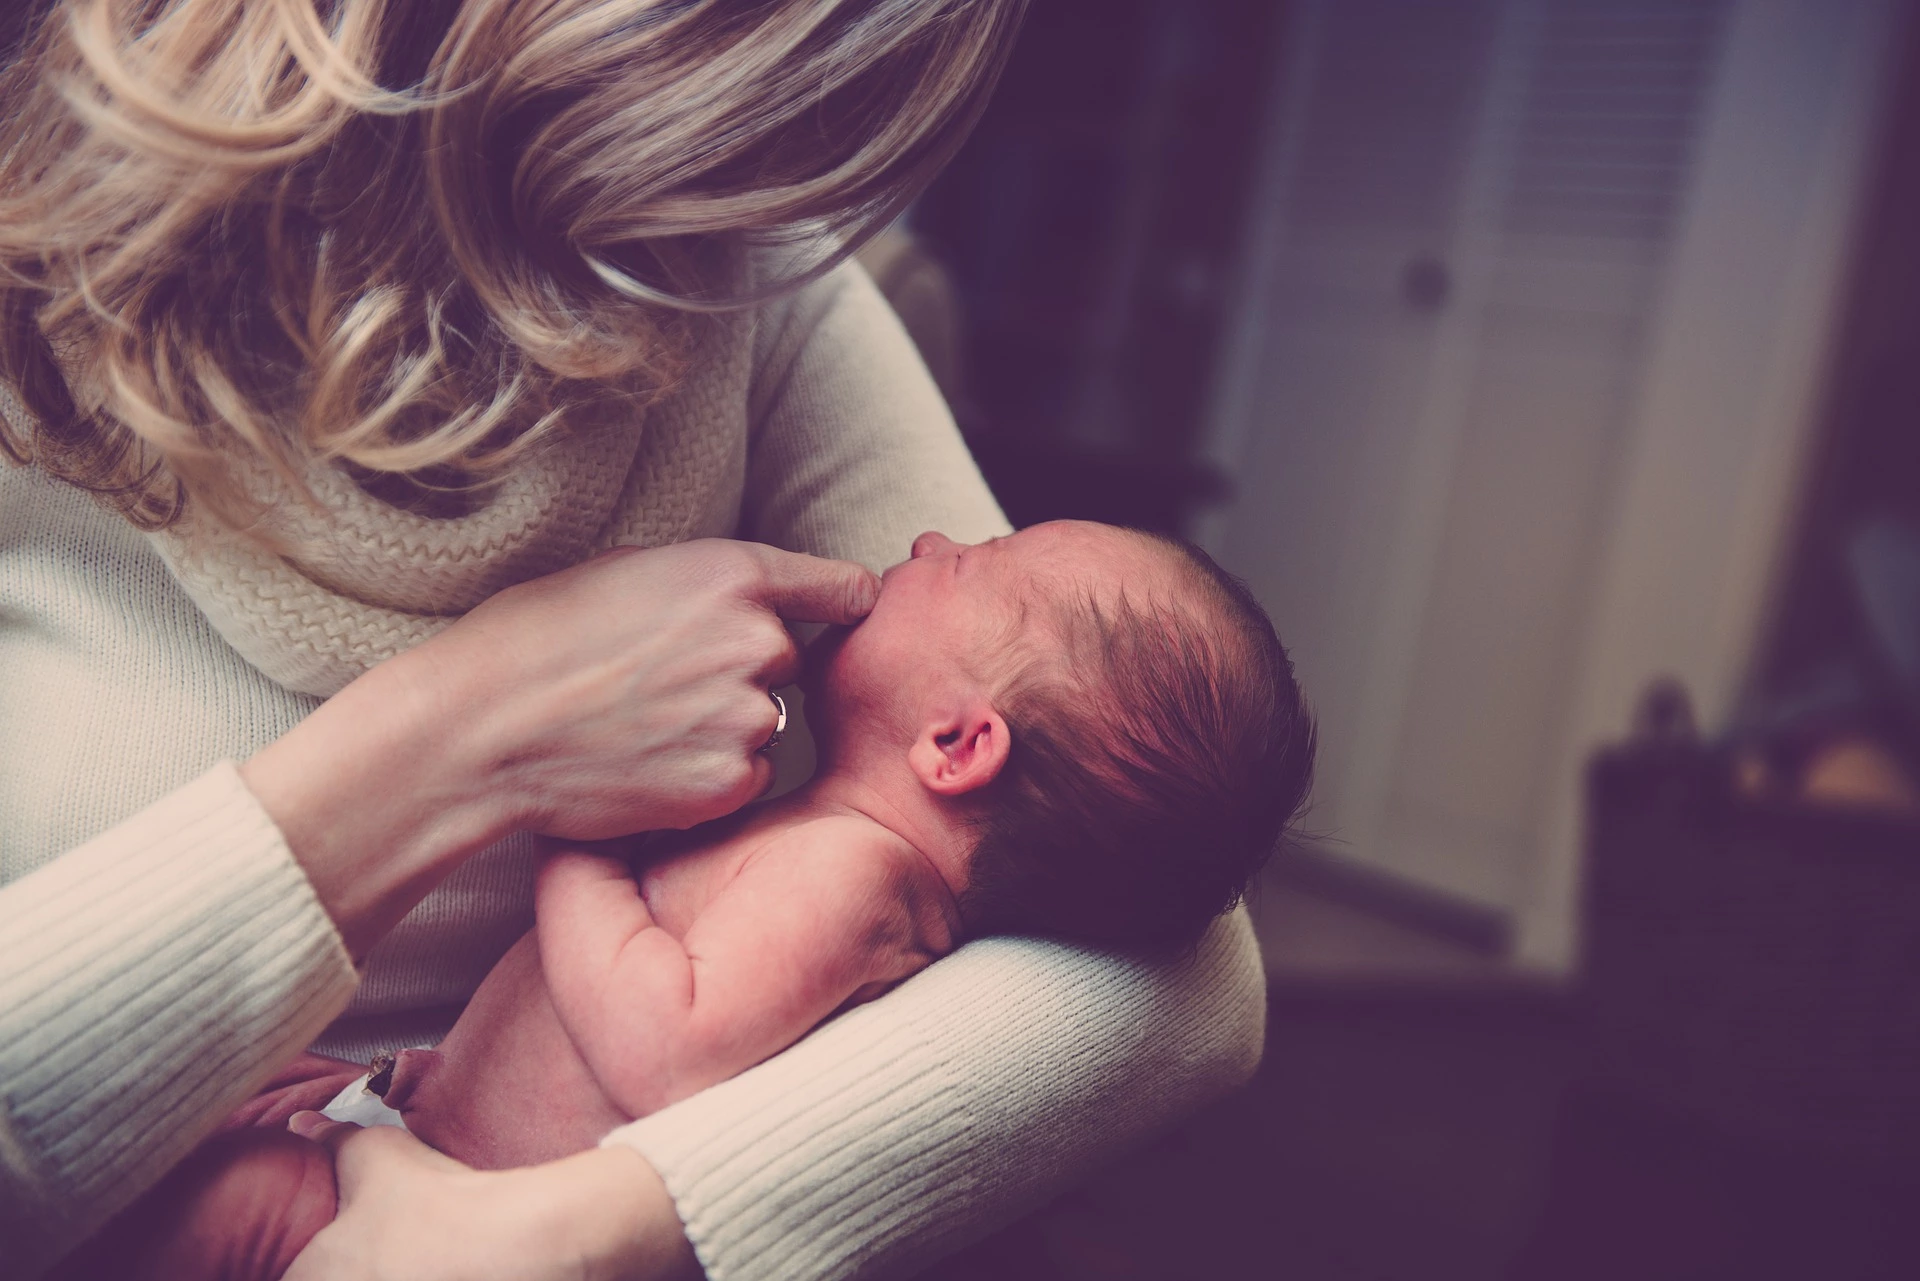 6 common health issues that affect new mothers